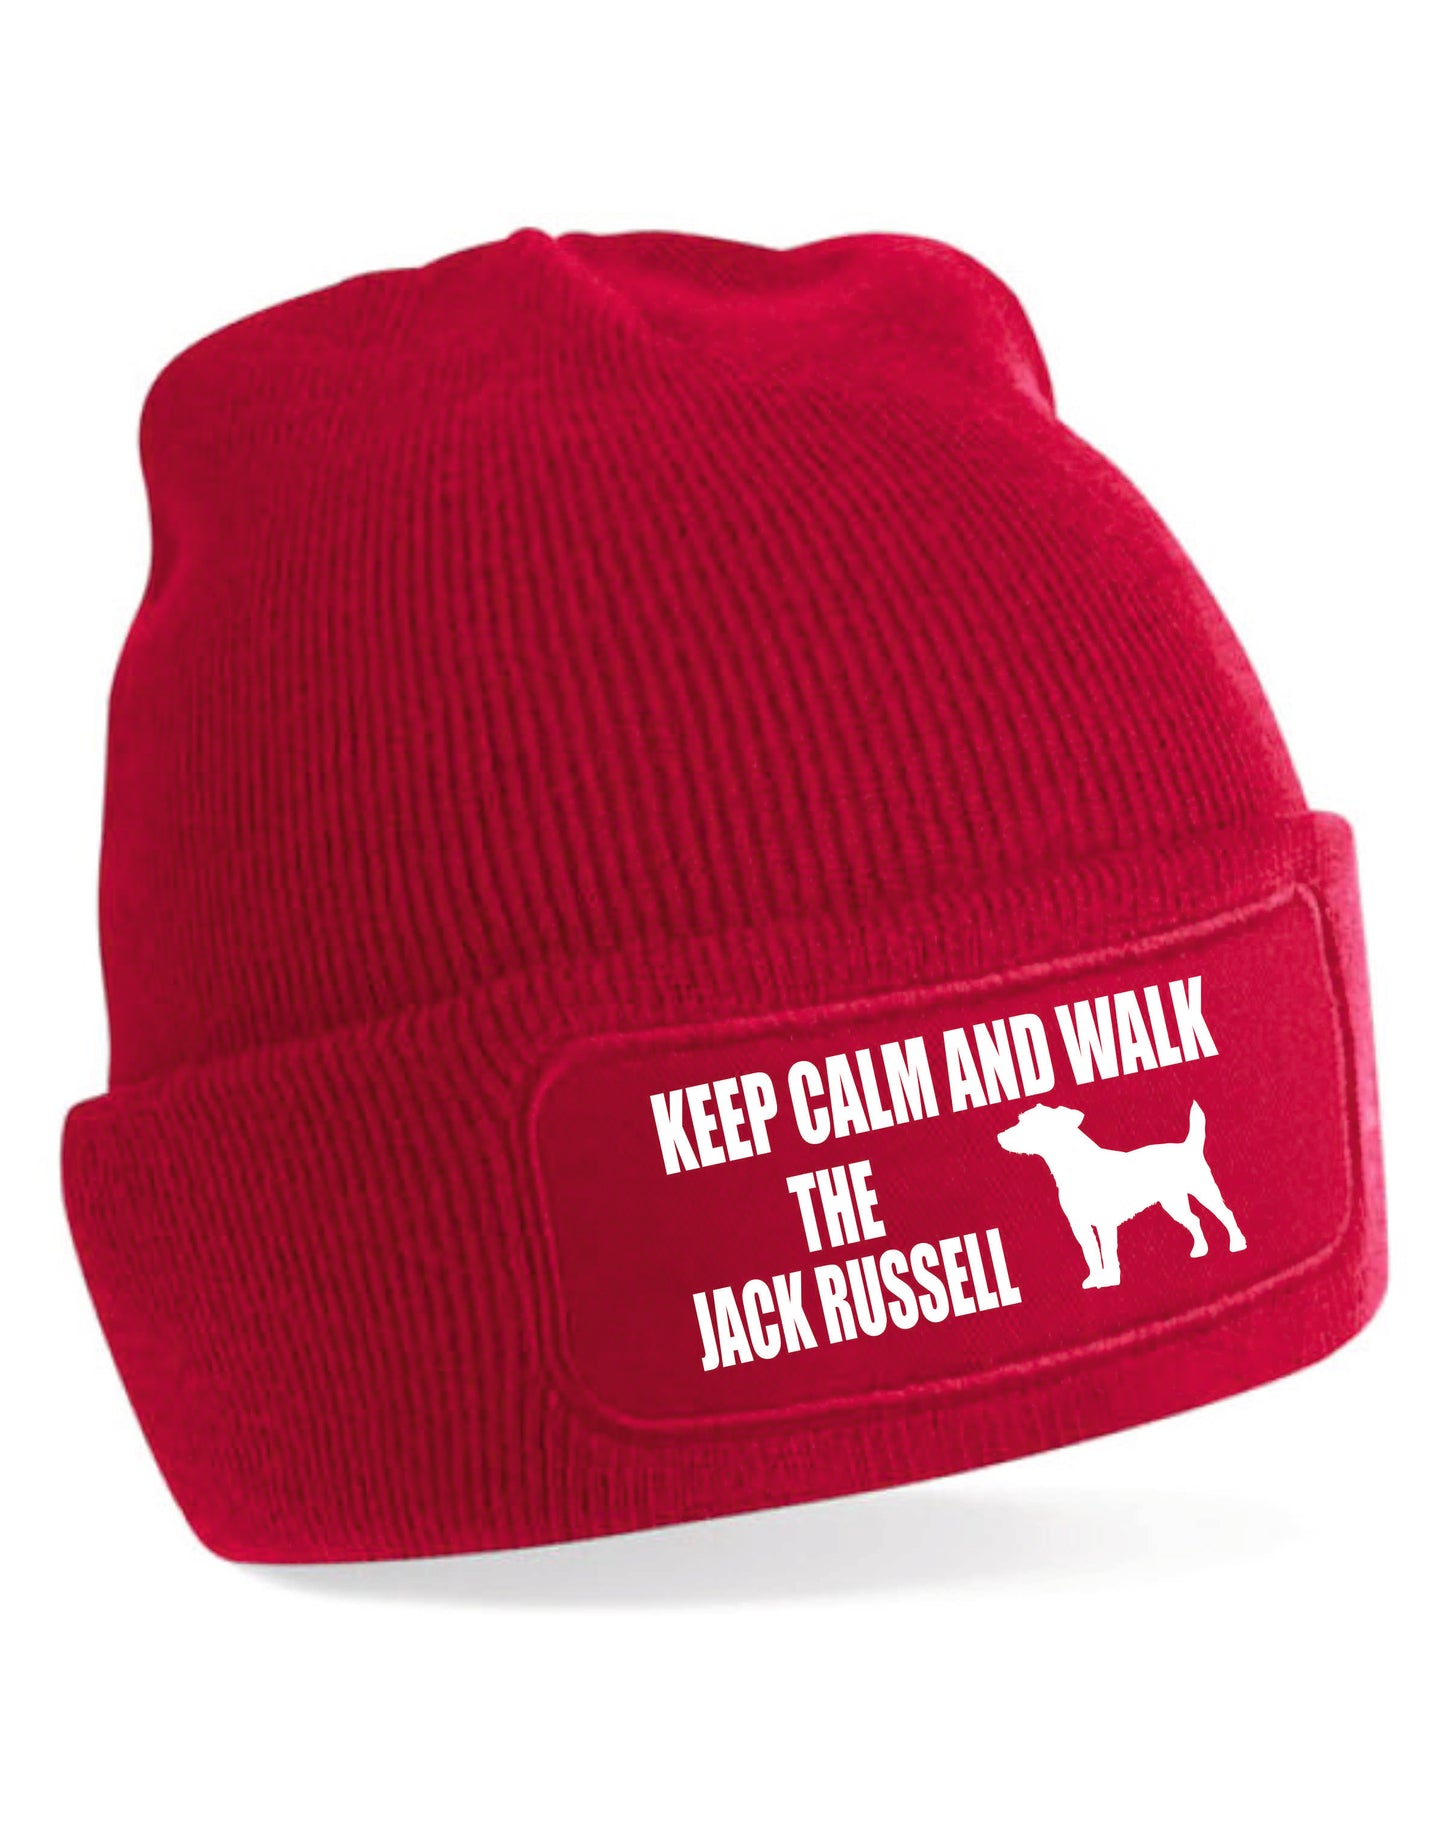 Keep Calm & Walk Jack Russell Beanie Hat Dog Lovers Gift Great For Men & Ladies